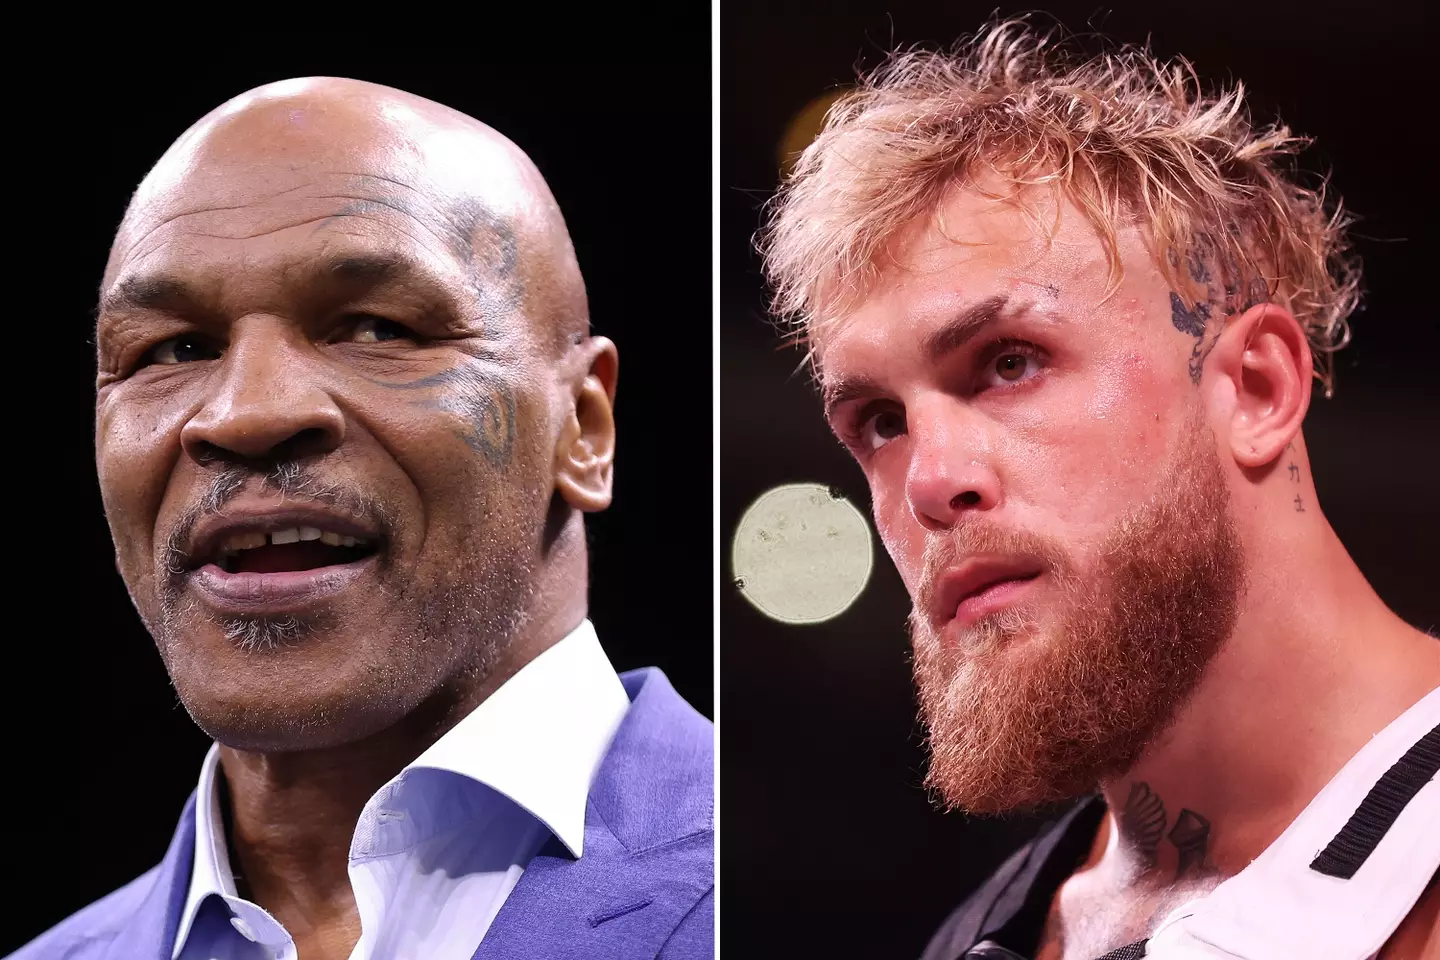 Mike Tyson will face Jake Paul later this year. (